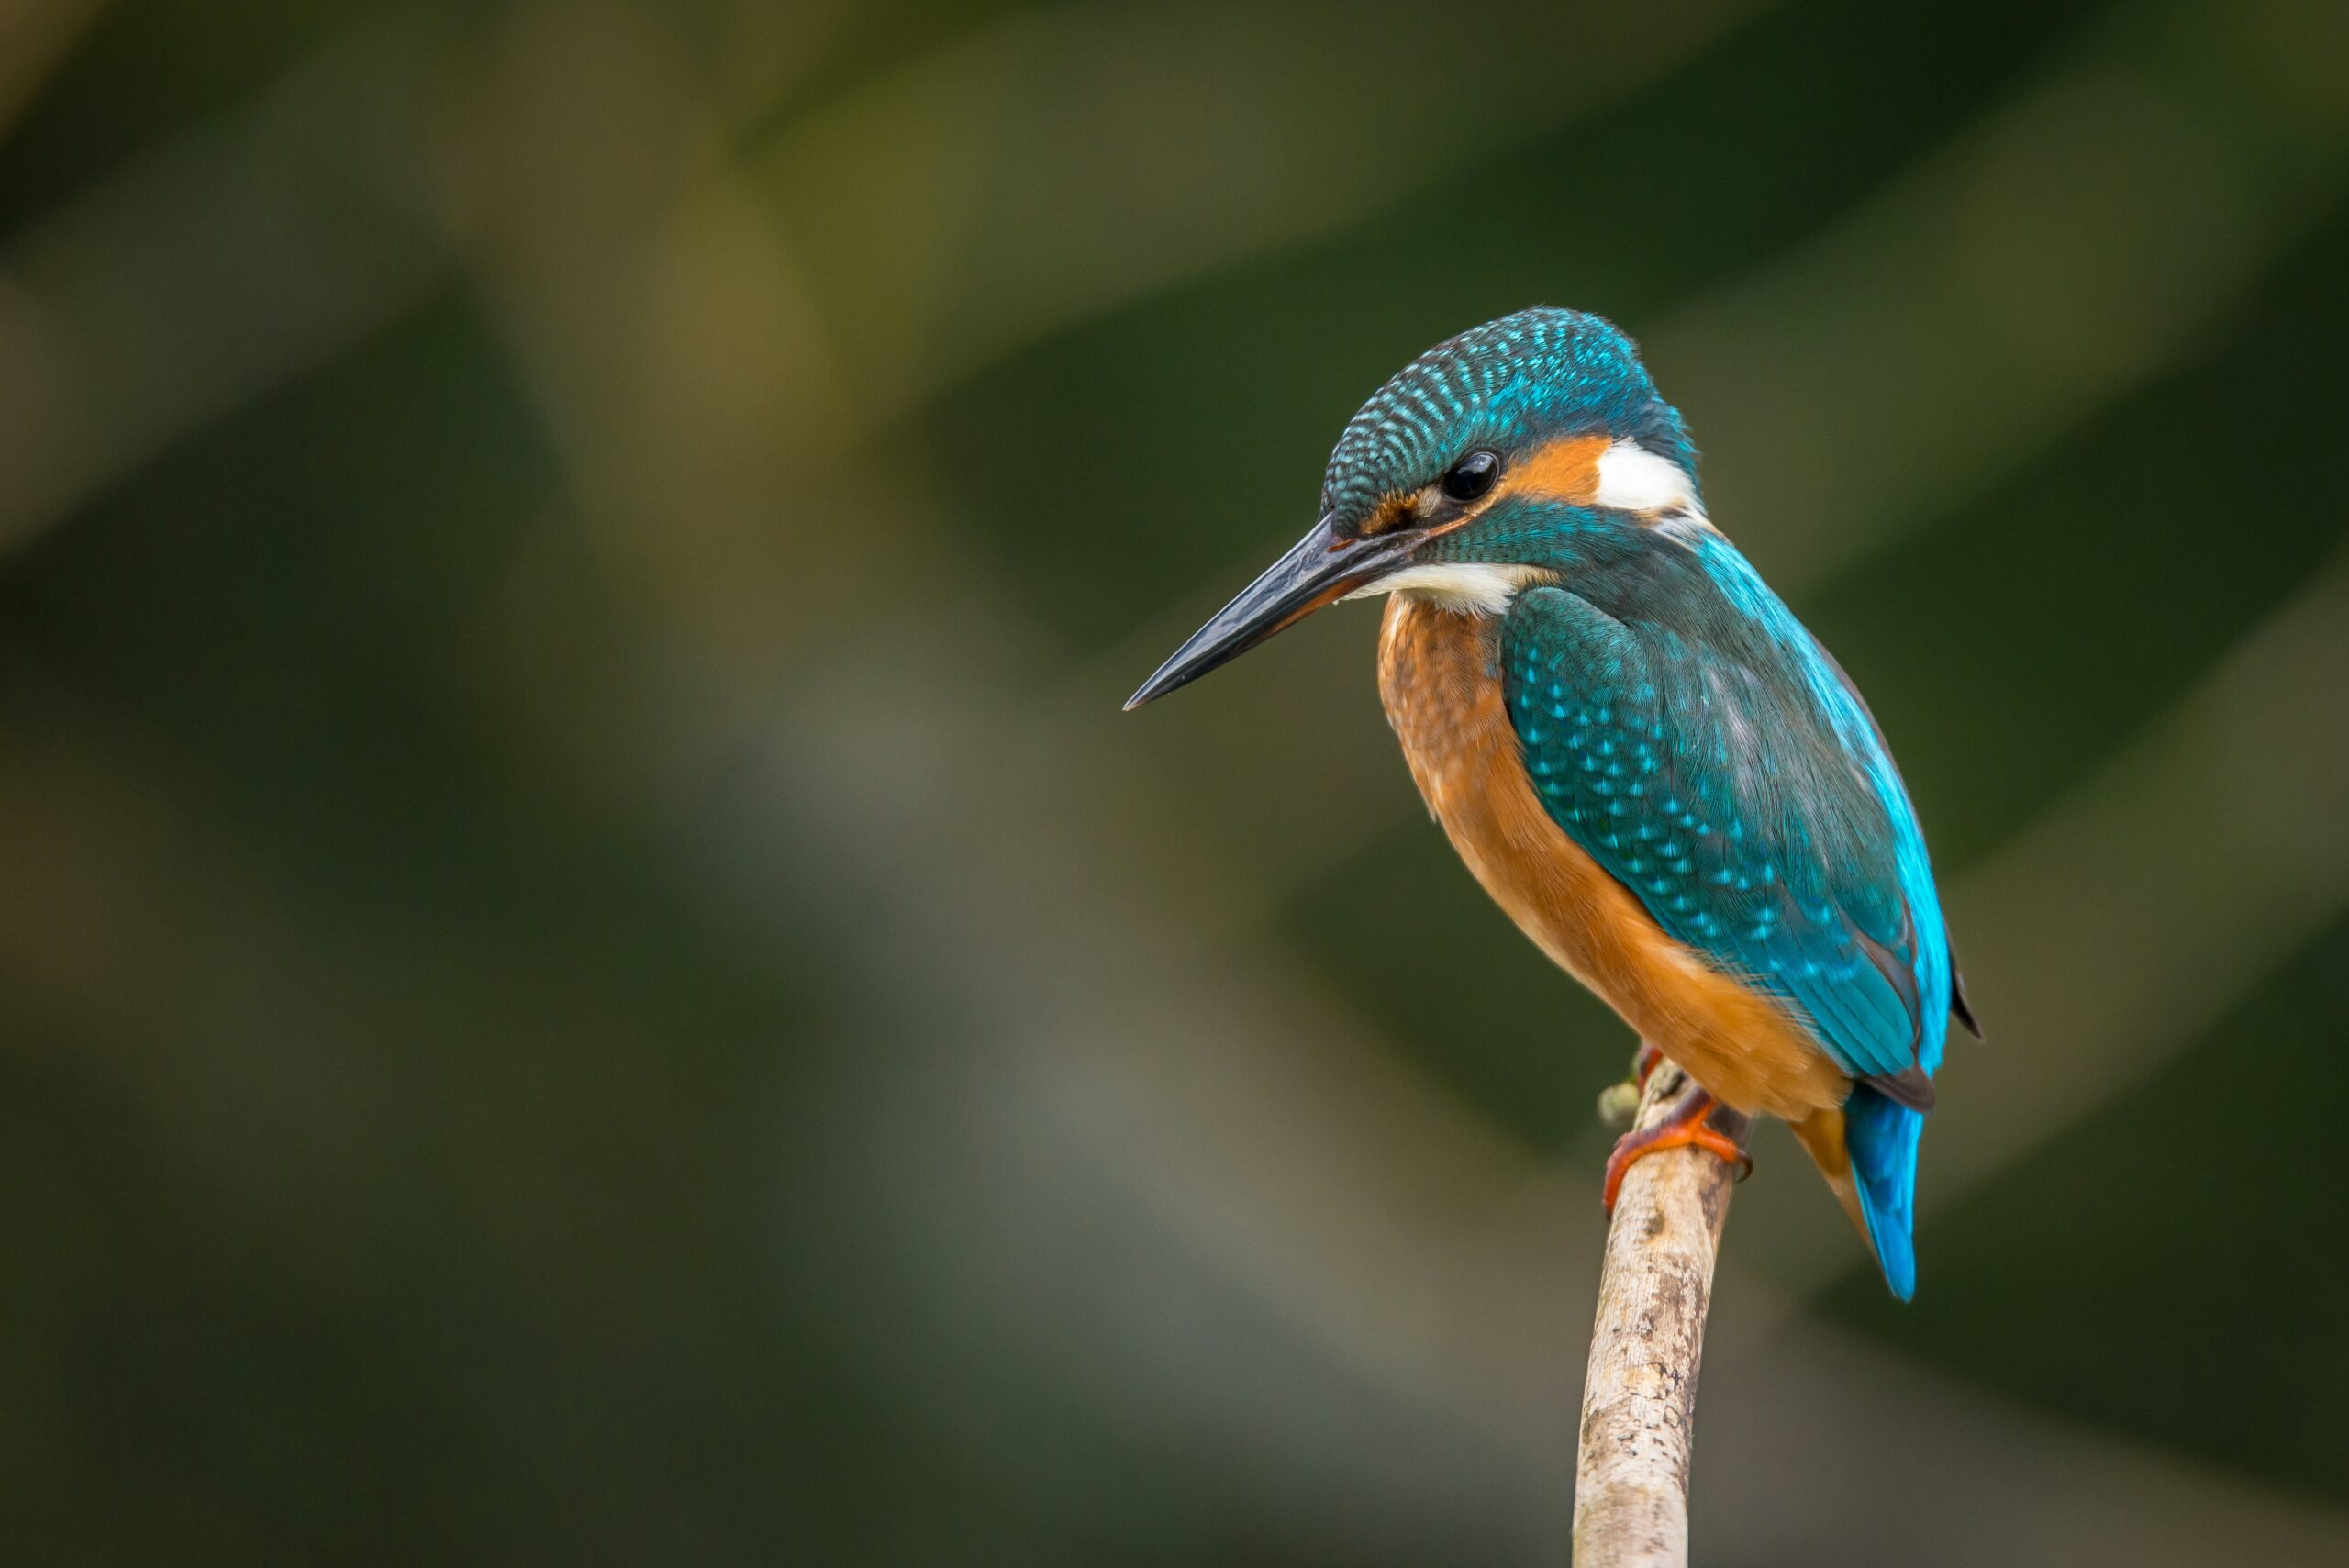 What Are The Options For Guided Bird-watching Tours In Nicaragua?